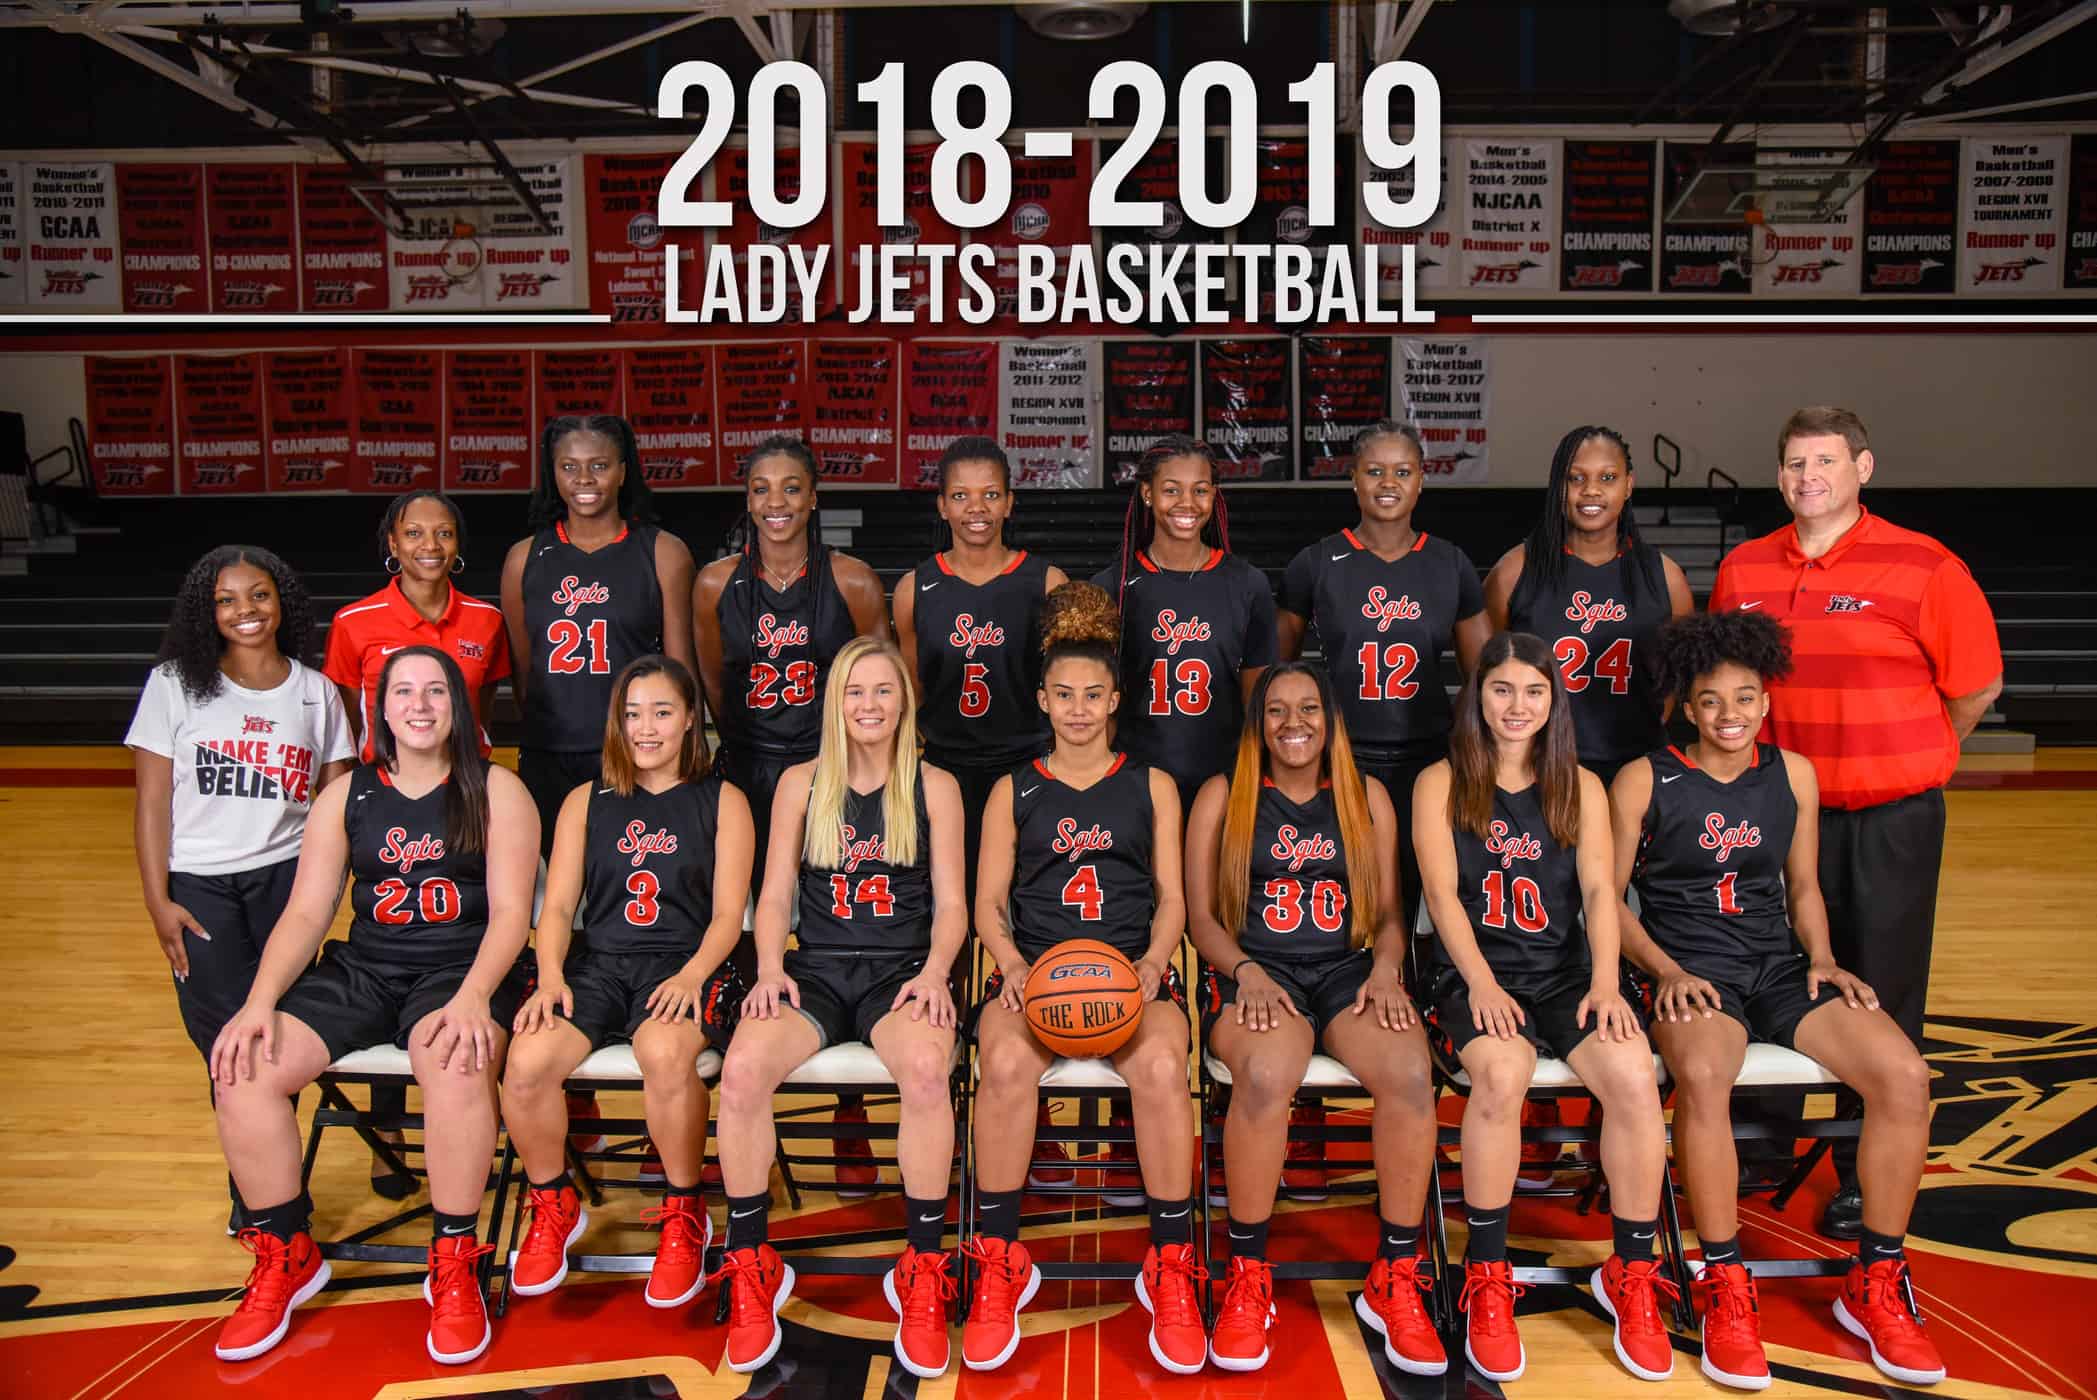 South Georgia Technical College Lady Jets 2018 – 2019 team ranked 5th in the nation academically by the Women’s Basketball Coaches Association.